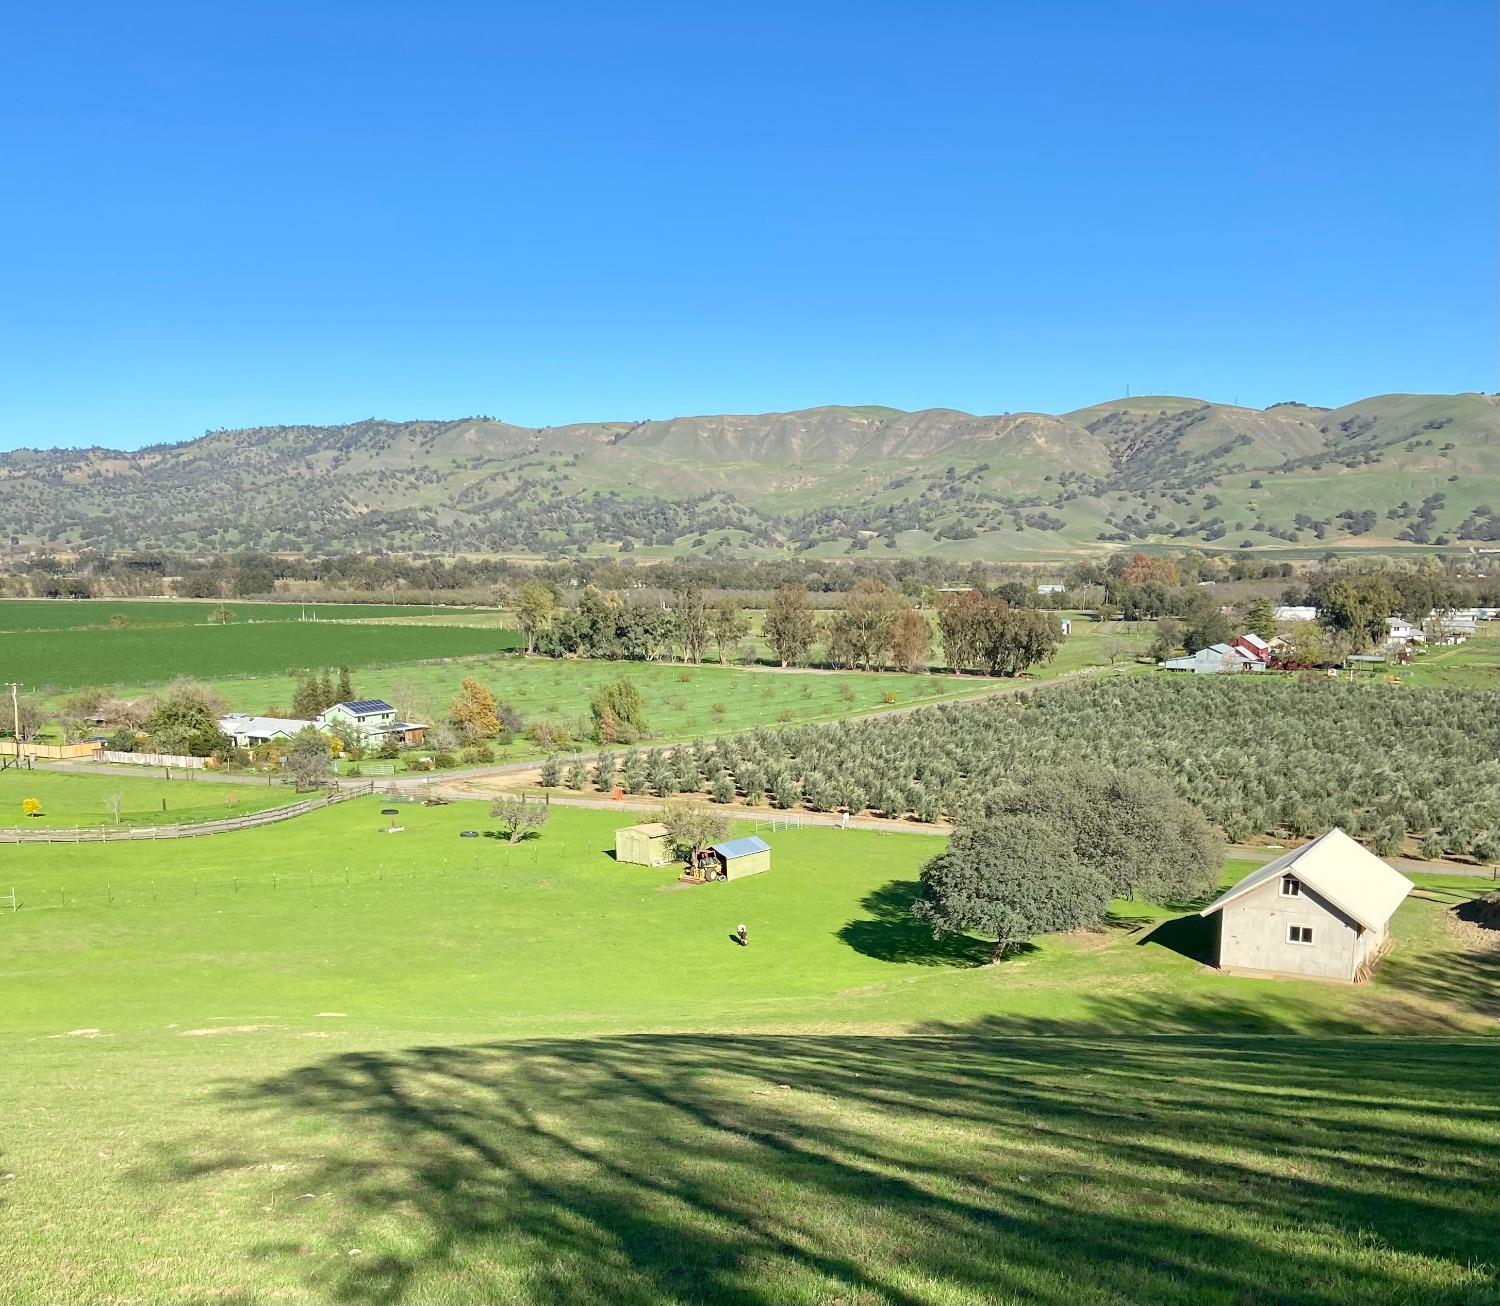 Gorgeous views to the East and Capay Valley - situated in Brooks CA just past Cache Creek Casino and Seke Olive Oil - live the country lifestyle!